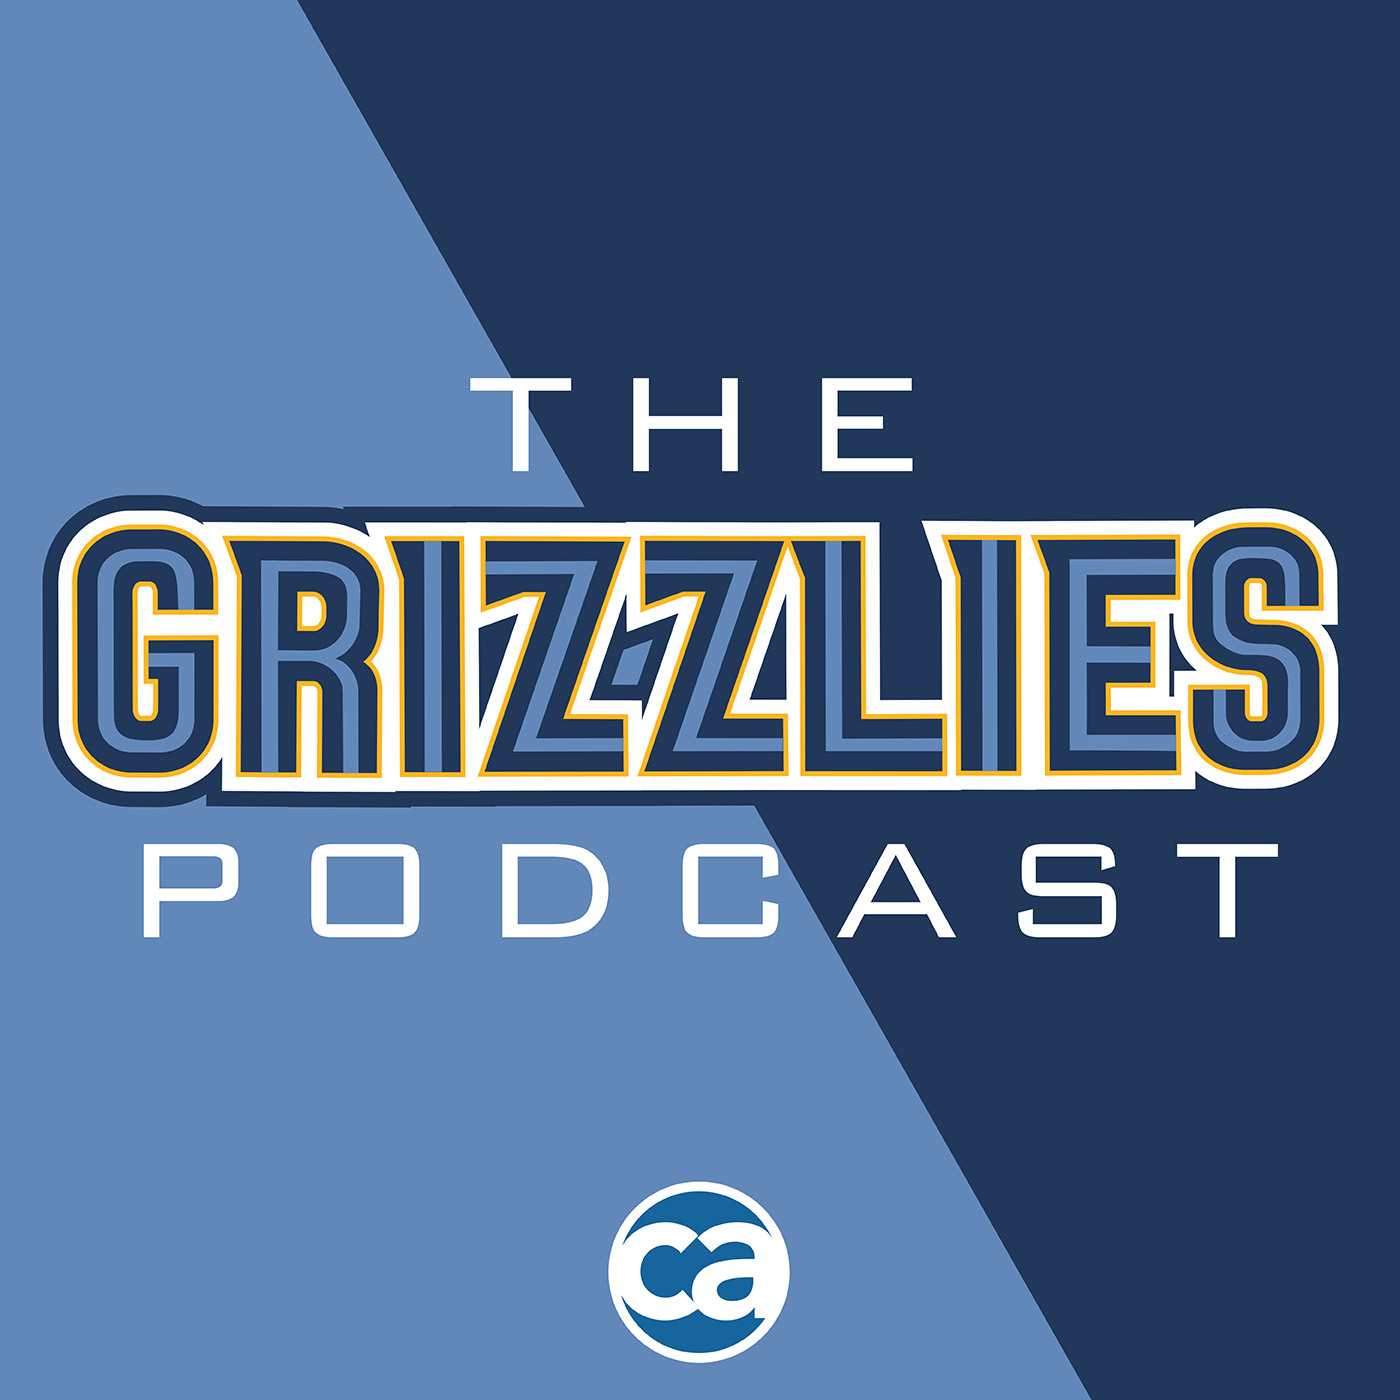 A look at Ja Morant's surge in technical fouls, plus Warriors-Grizzlies Christmas preview